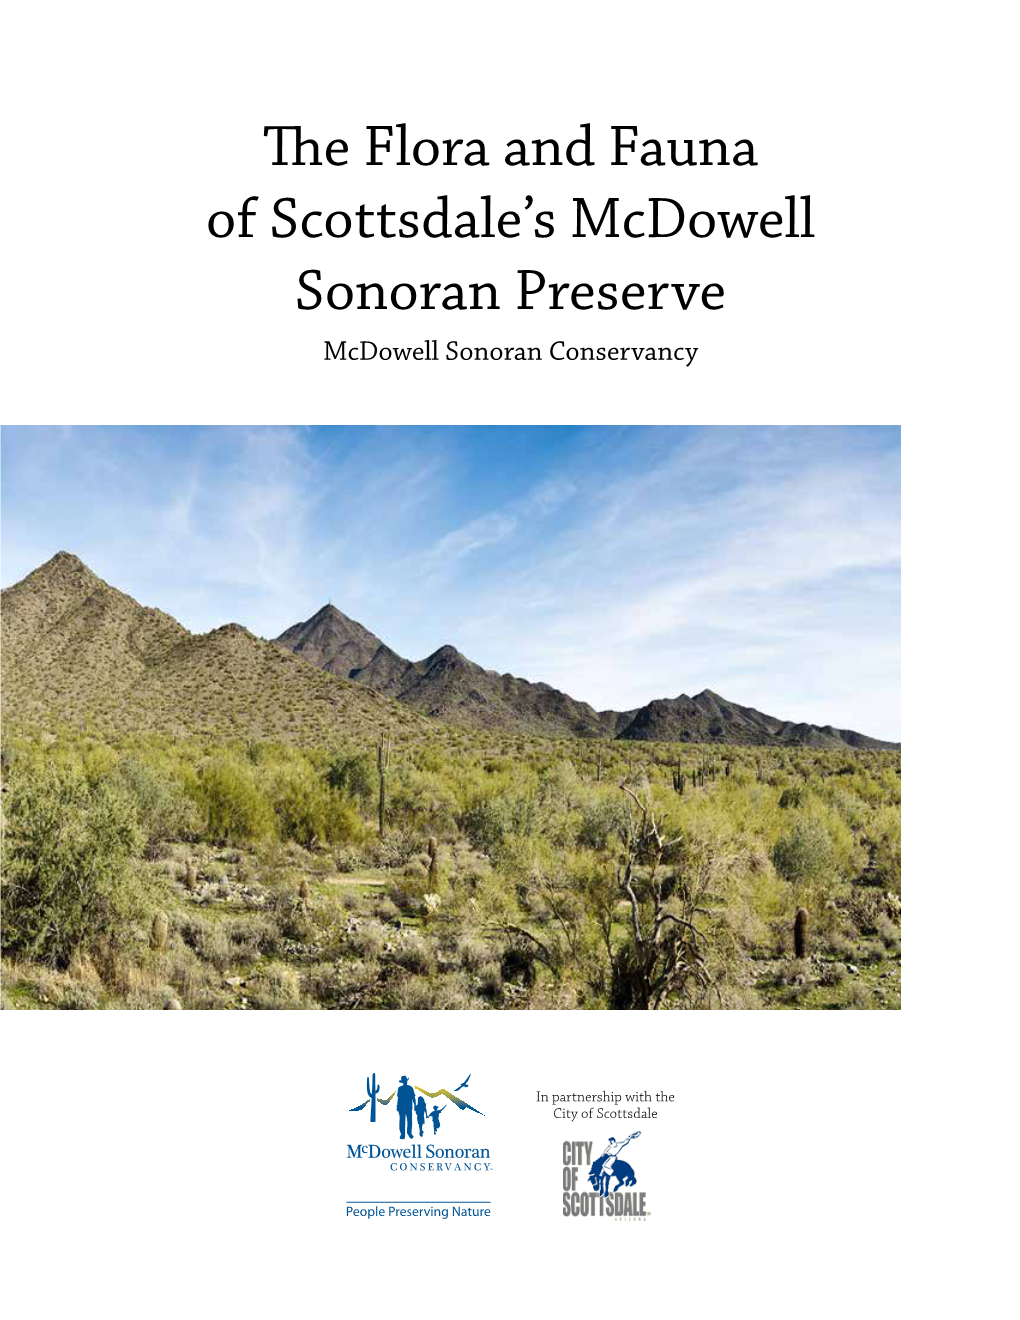 The Flora and Fauna of Scottsdale's Mcdowell Sonoran Preserve